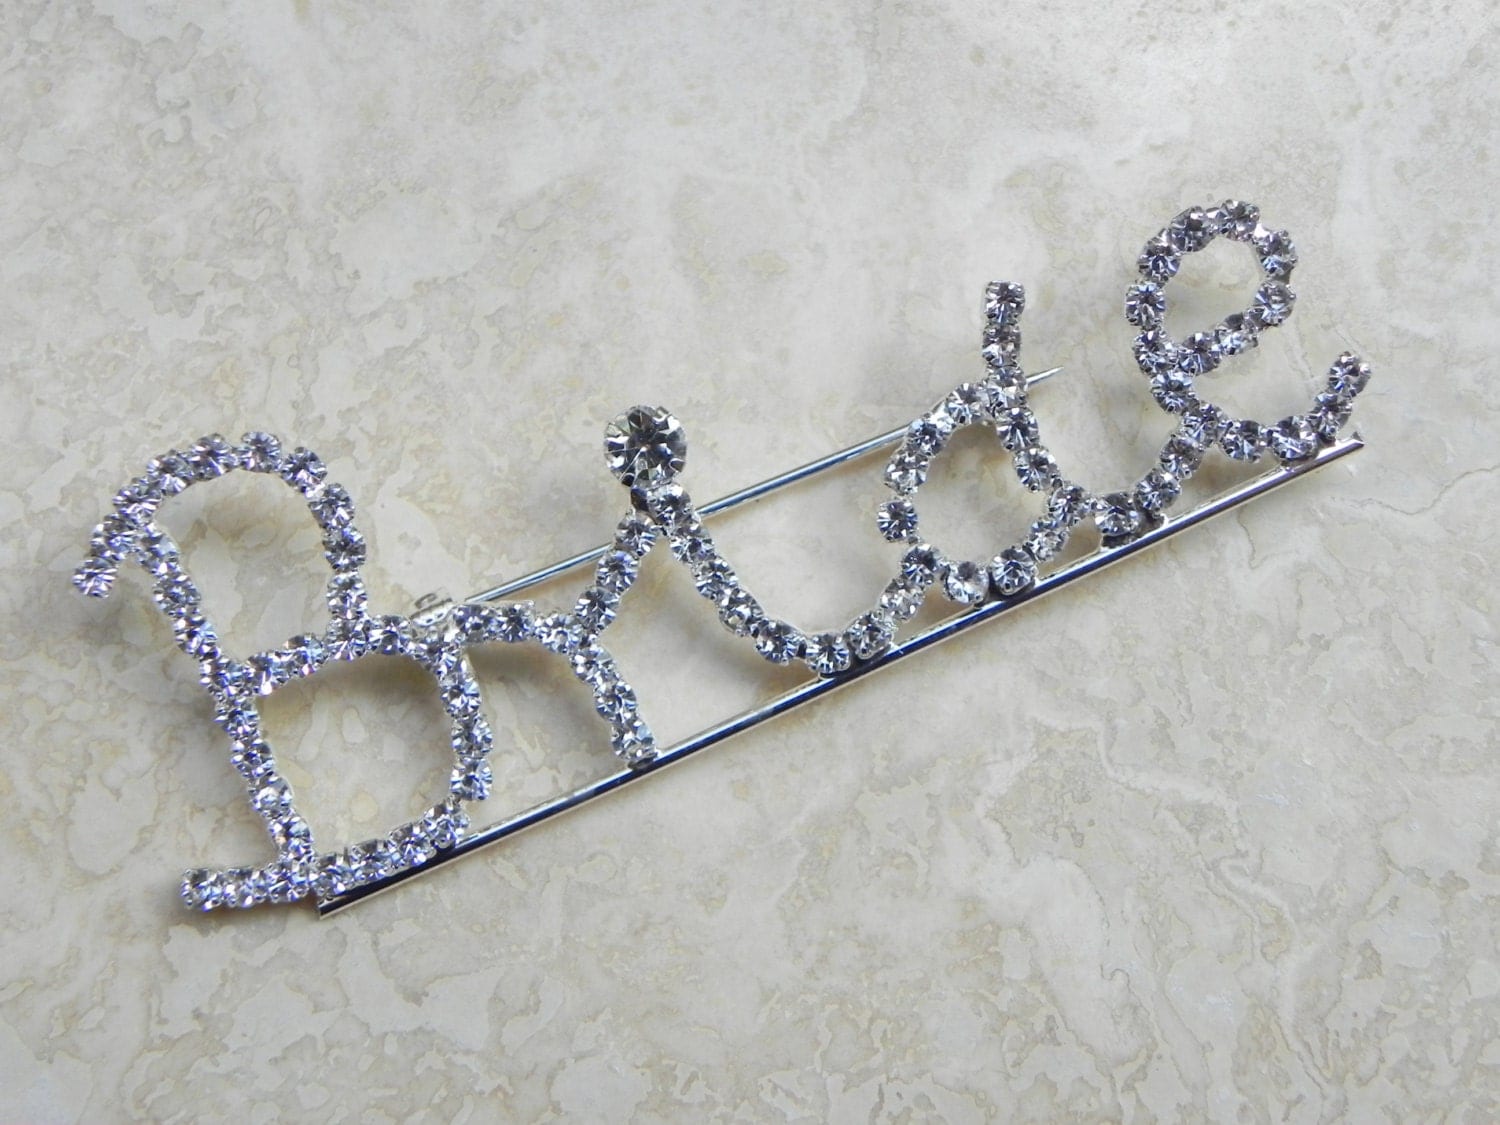 Bride Pin Brooch for Brooch Bouquet or Wedding Accents - Cursive Font